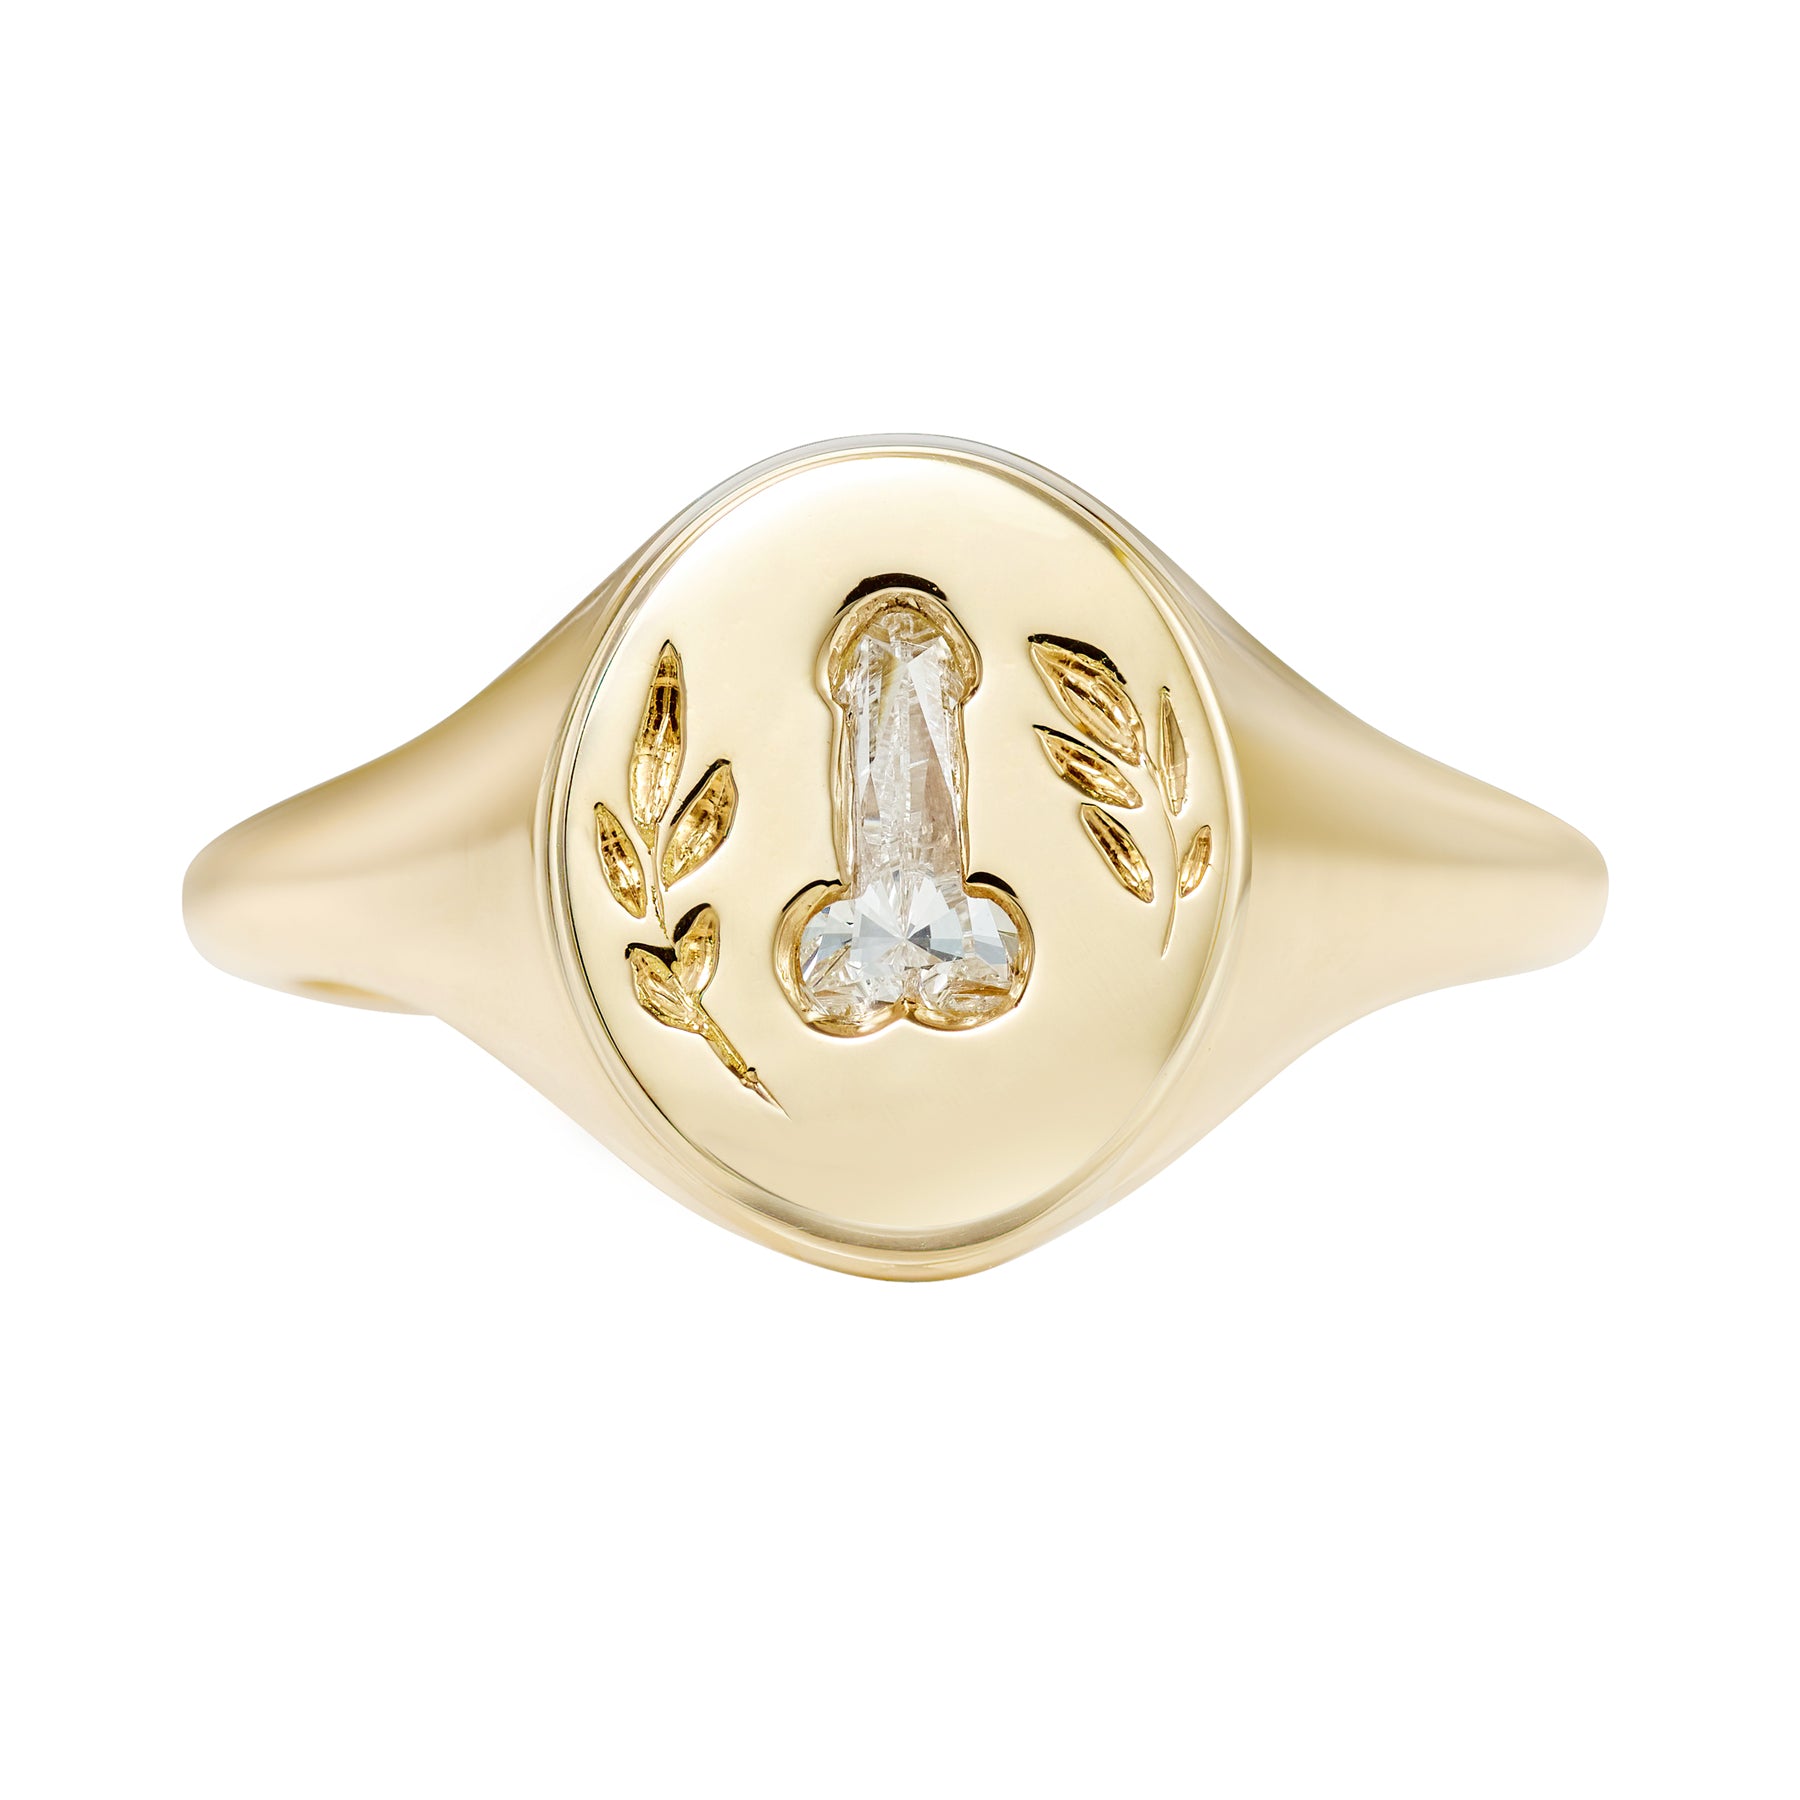 Statement Ring with a F.U. Diamond and Hand Engraving – ARTEMER